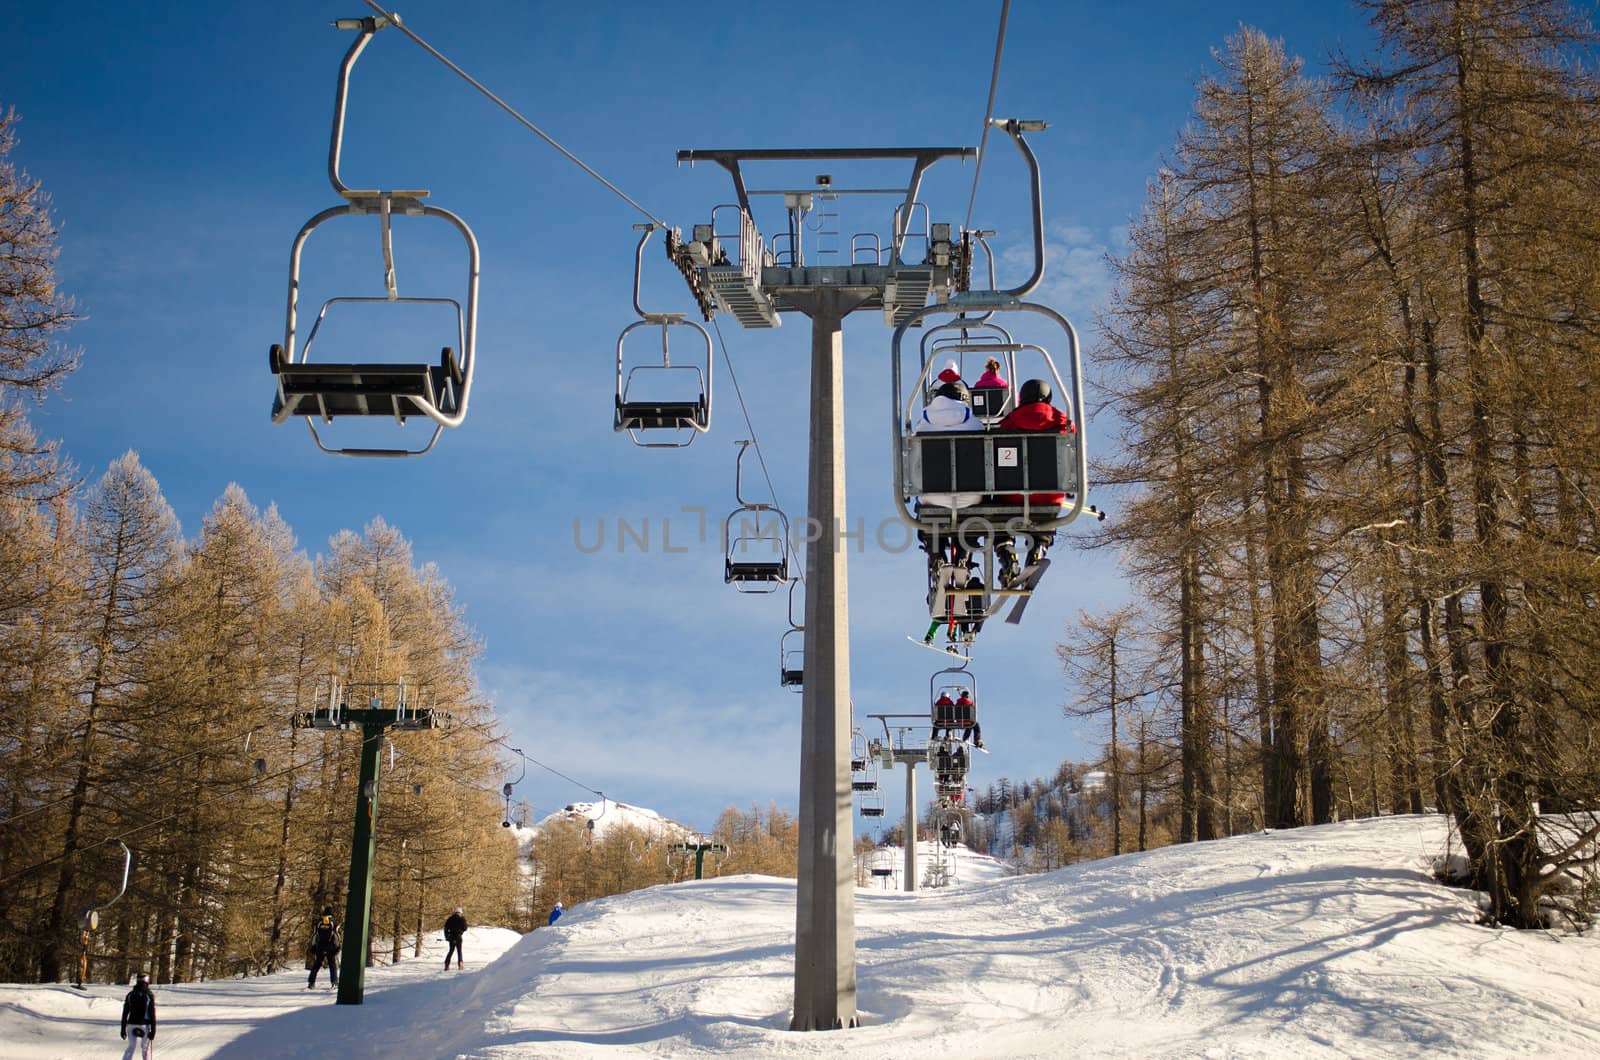 Aerial lift (chairlift) and skilift in sunny day by artofphoto